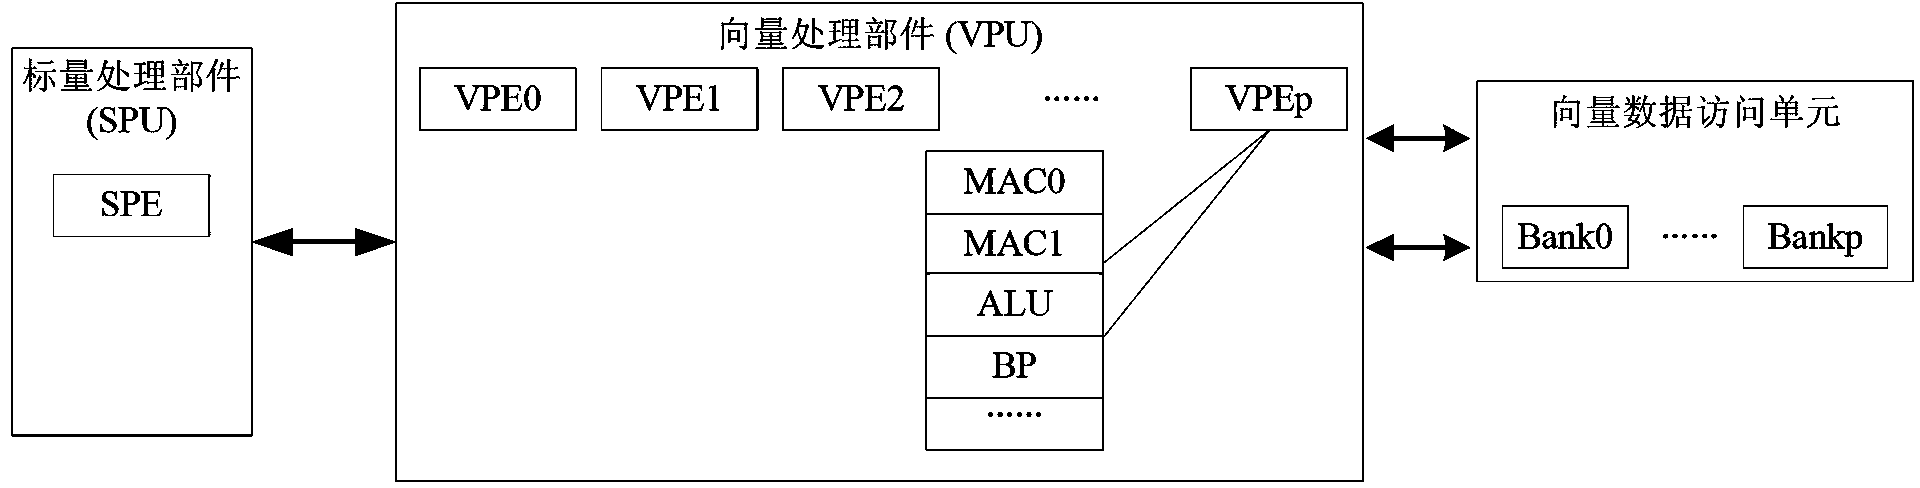 Block matrix multiplication vectorization method supporting vector processor with multiple MAC (multiply accumulate) operational units